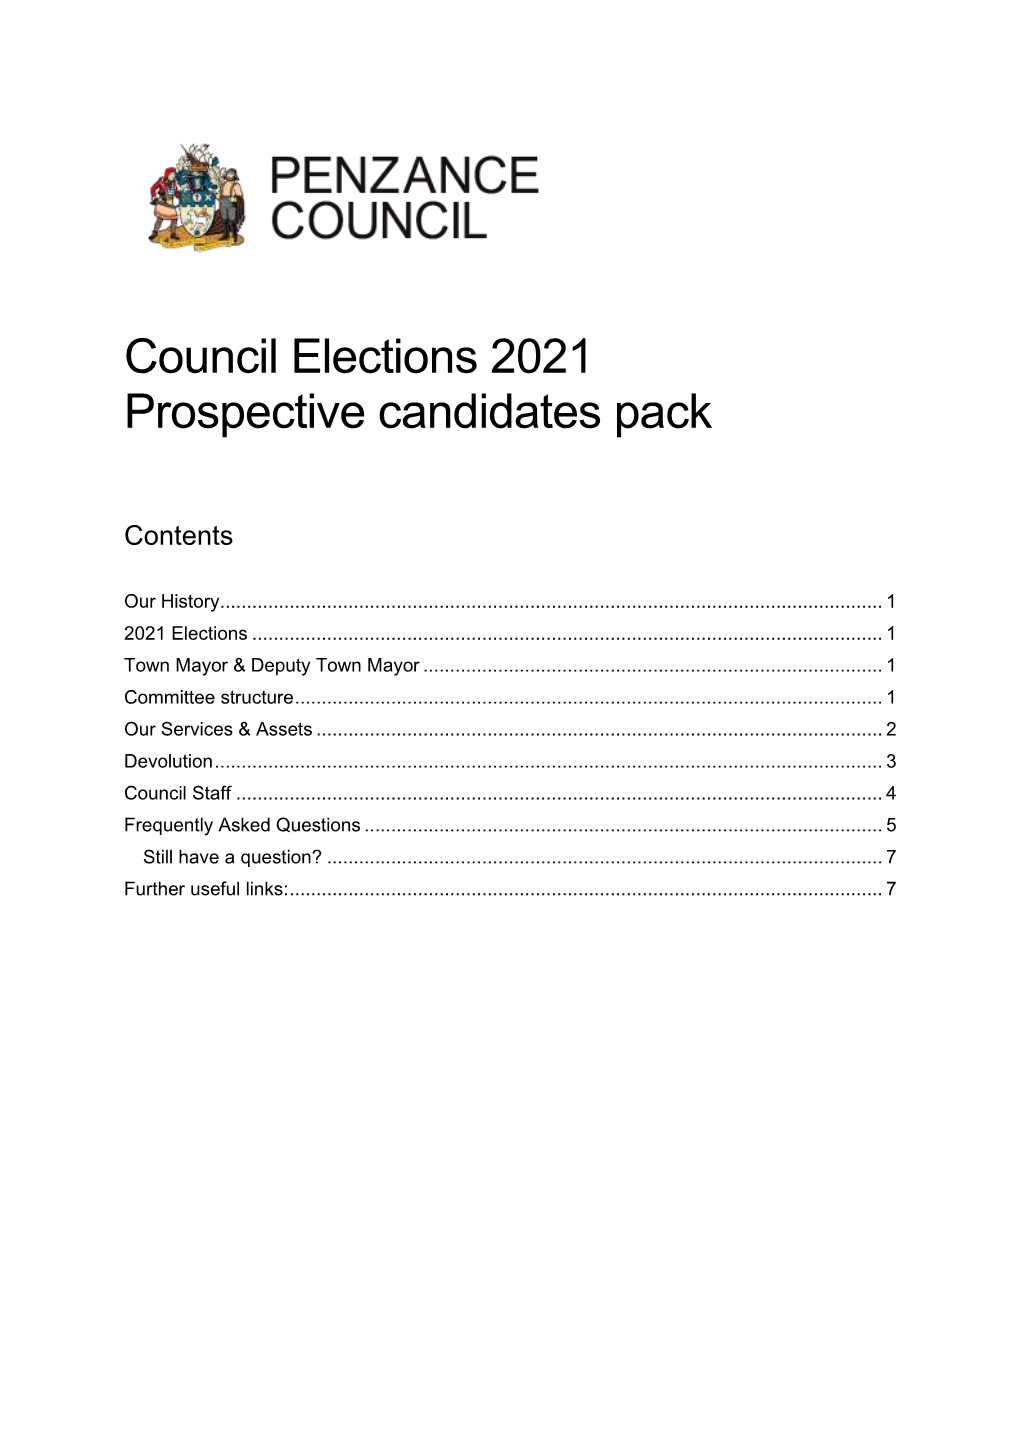 Council Elections 2021 Prospective Candidates Pack